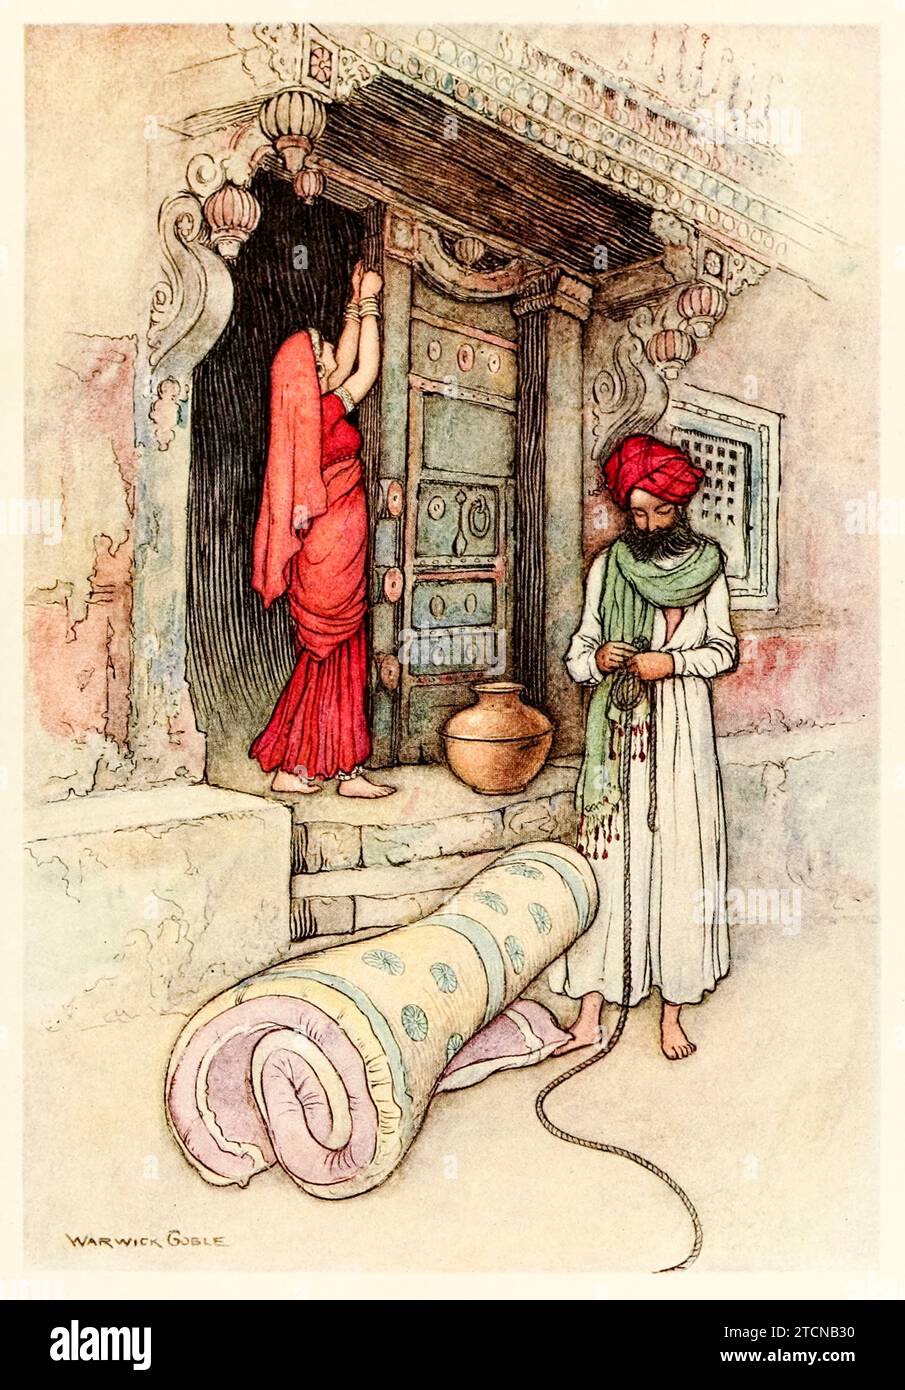 ‘Then they set out of their journey’ from ‘Folk-tales of Bengal’ by Lal Behari Day (1824-1882), illustration by Warwick Goble (1862-1972). Photograph from a 1912 edition. Credit: Private Collection / AF Fotografie Stock Photo